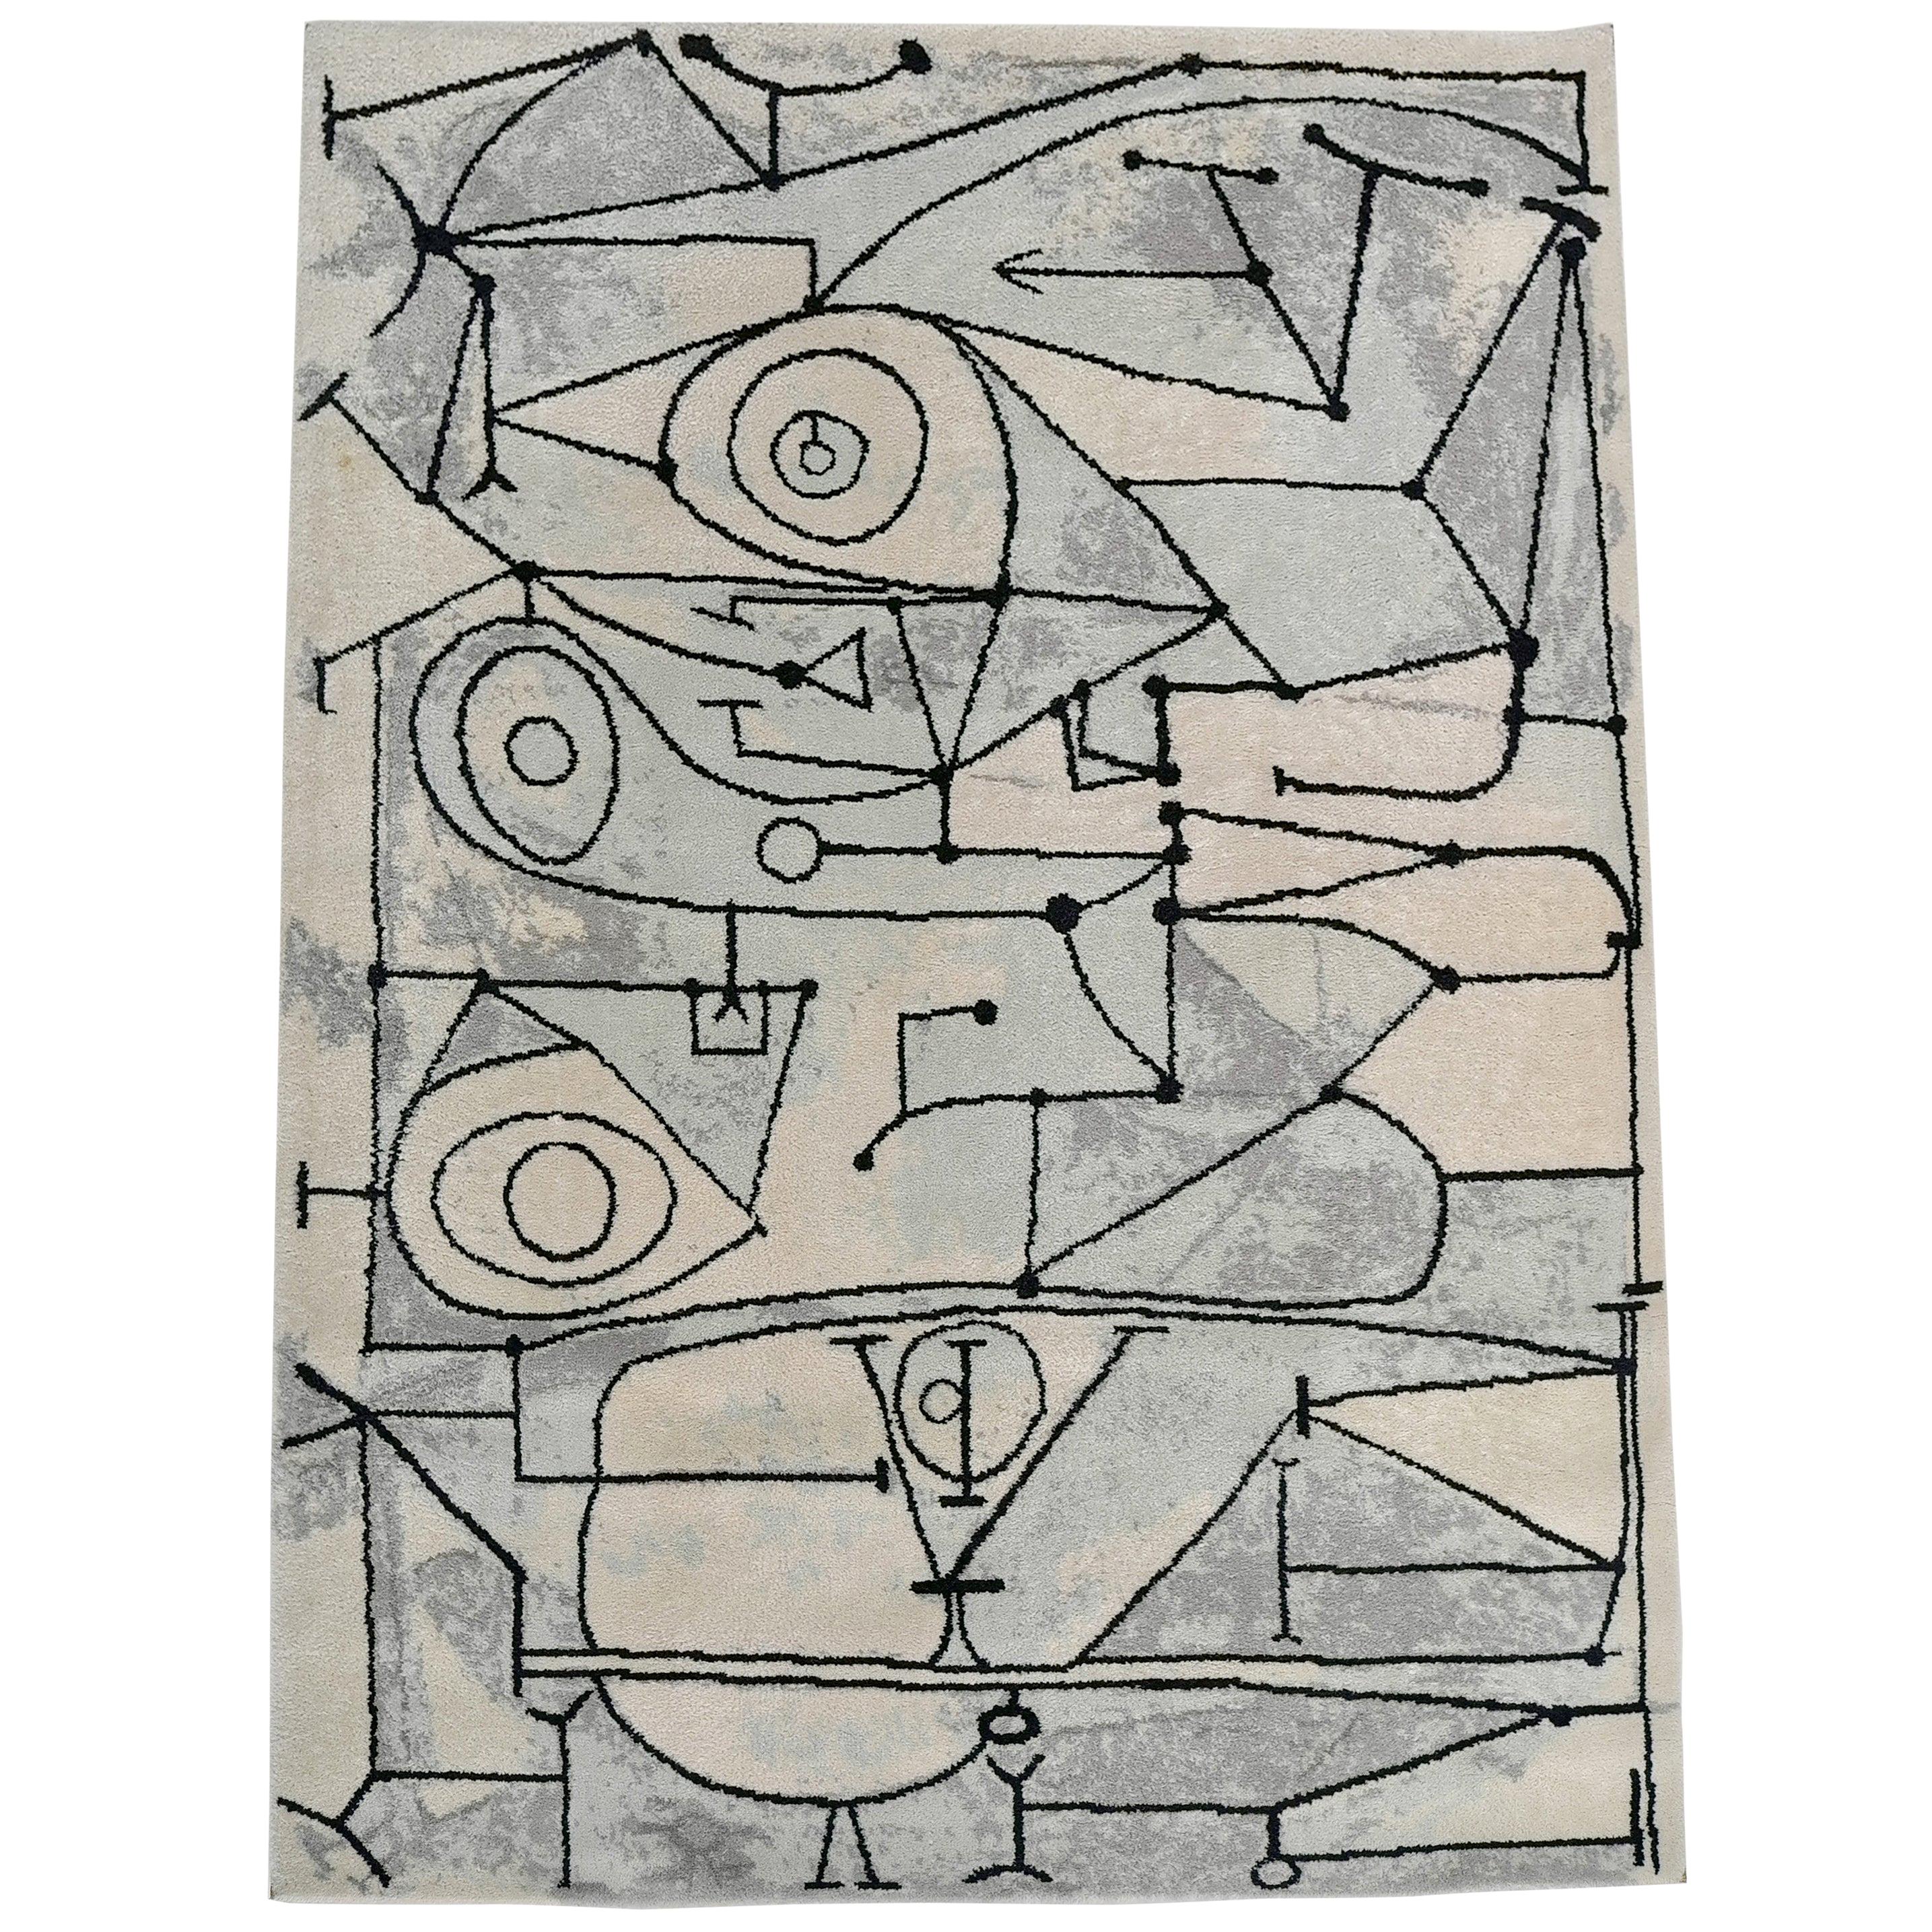 Pablo Picasso 'after' "La Cocina" Art Rug white Abstract by Desso